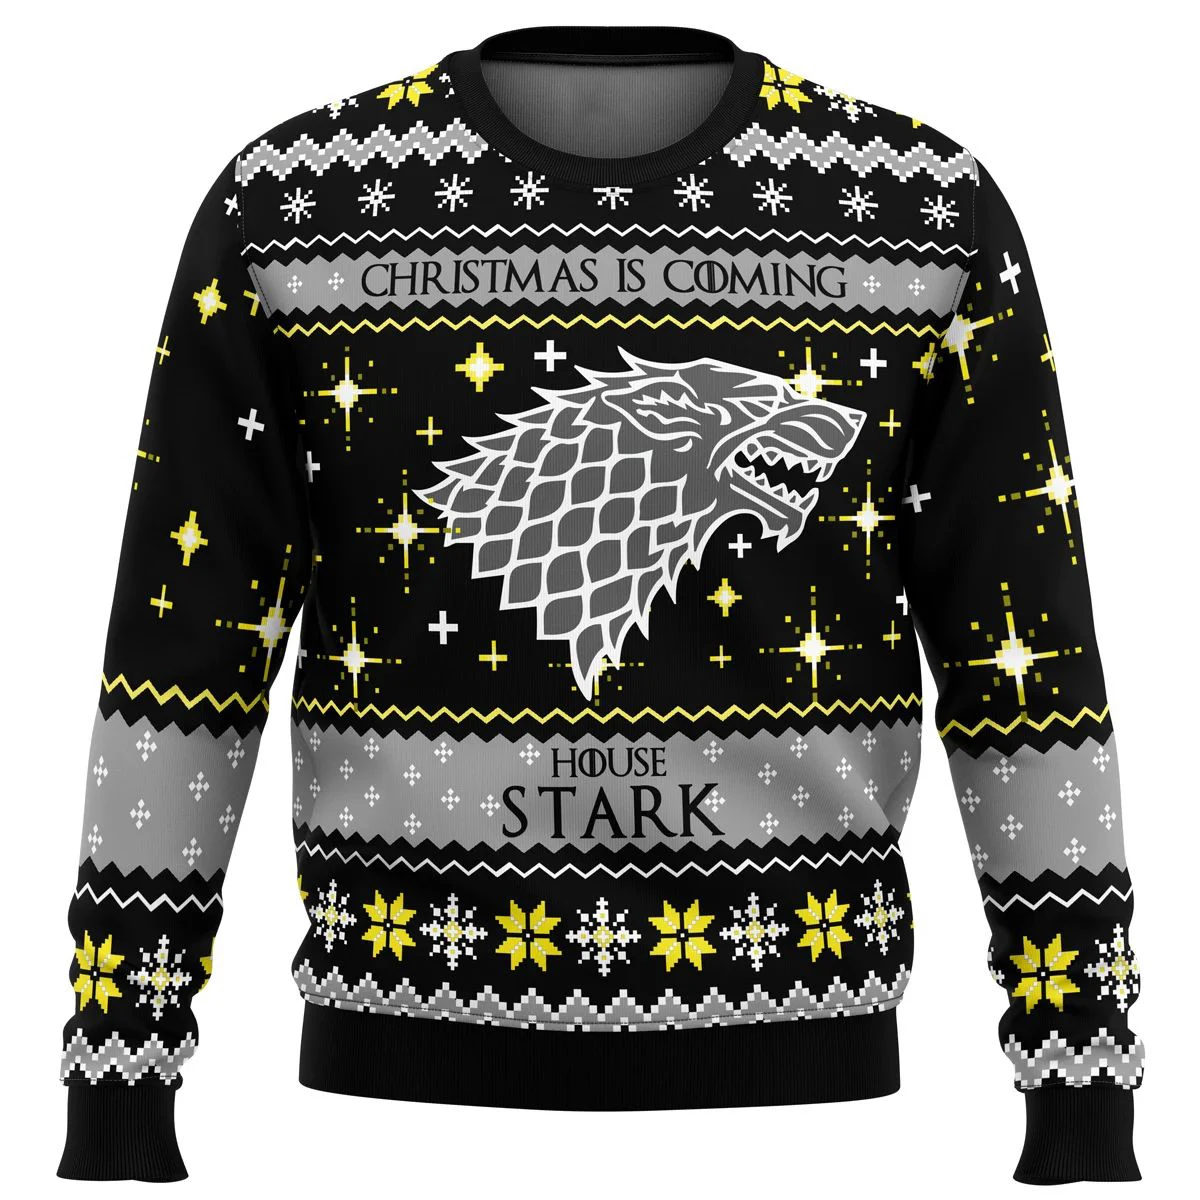 Game Of Thrones Christmas Is Coming Ugly Christmas Sweatshirt Gift Santa Claus Pullover Autumn Winter Men 9 - Game Of Thrones Shop